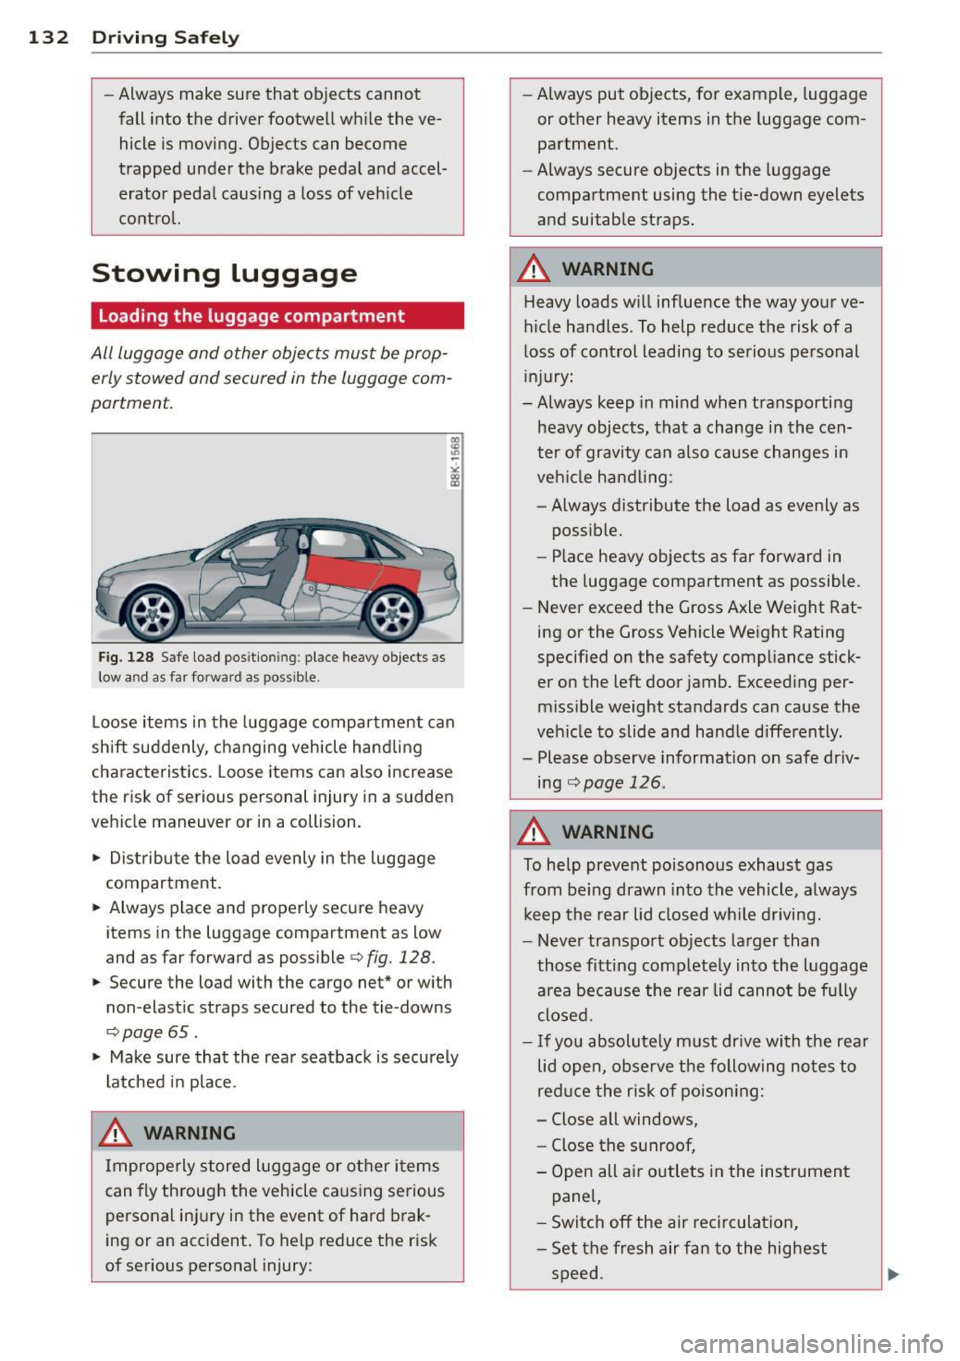 AUDI S4 SEDAN 2013  Owners Manual 132  Driving  Safel y 
-Always  make  sure  that  objects  cannot 
fall  into  the  driver  footwe ll wh ile  the  ve­
hicle  is  moving.  Objects  can  become 
trapped  under  the  brake  pedal  and